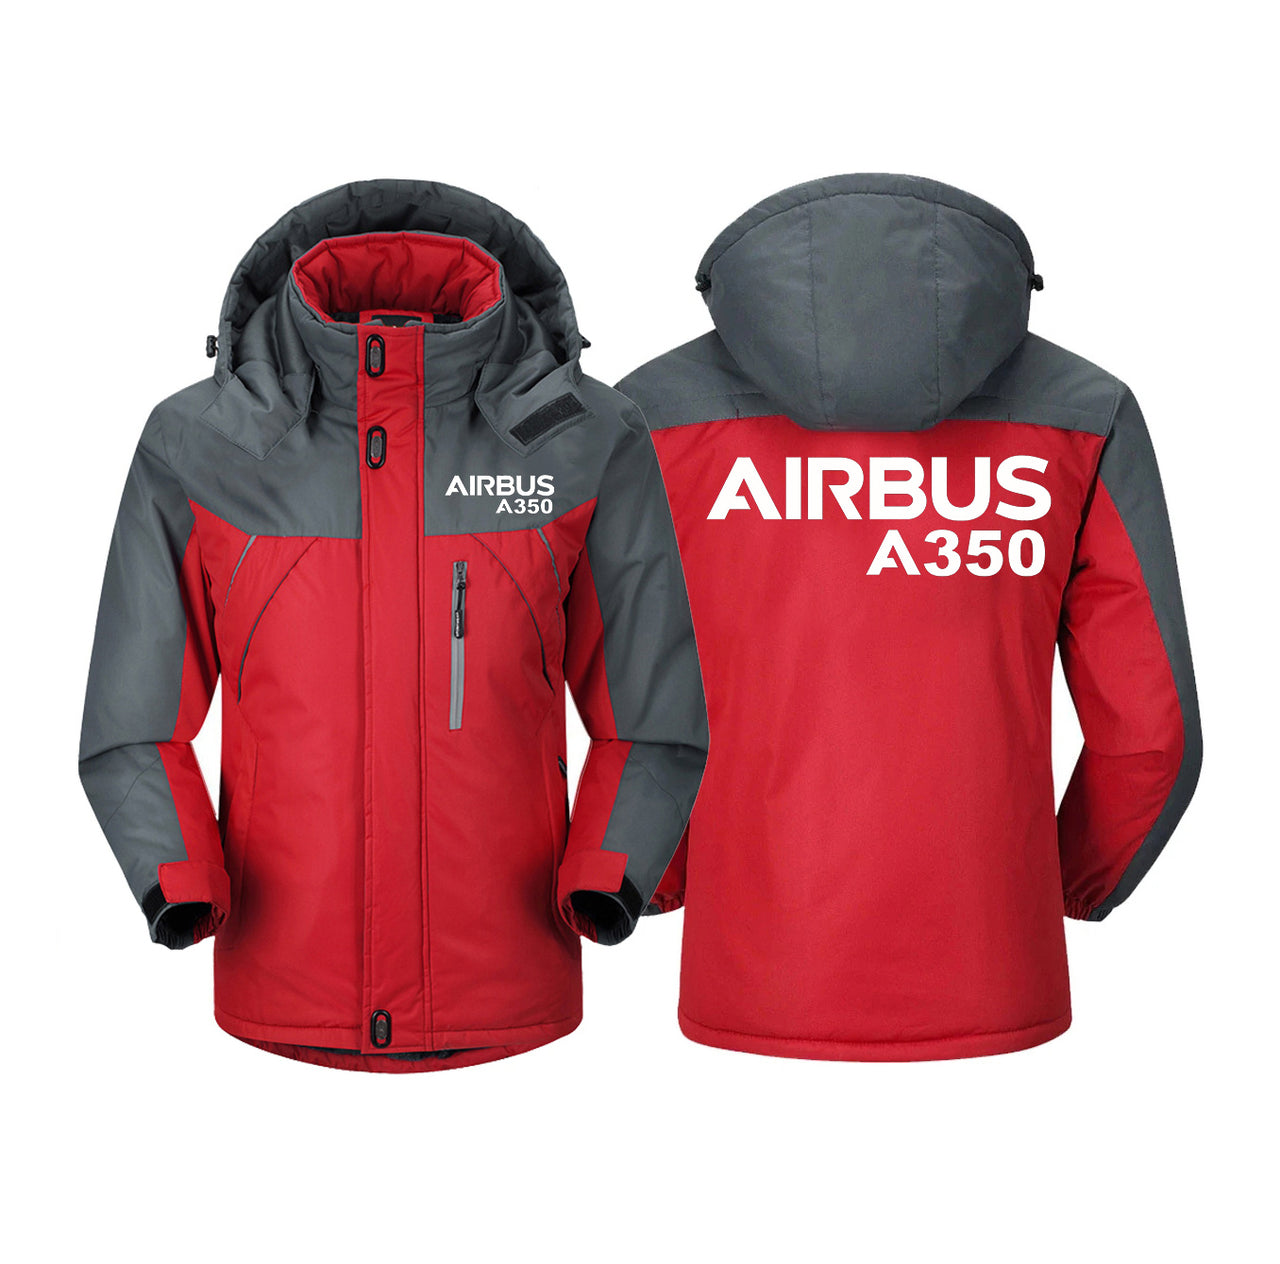 Airbus A350 & Text Designed Thick Winter Jackets